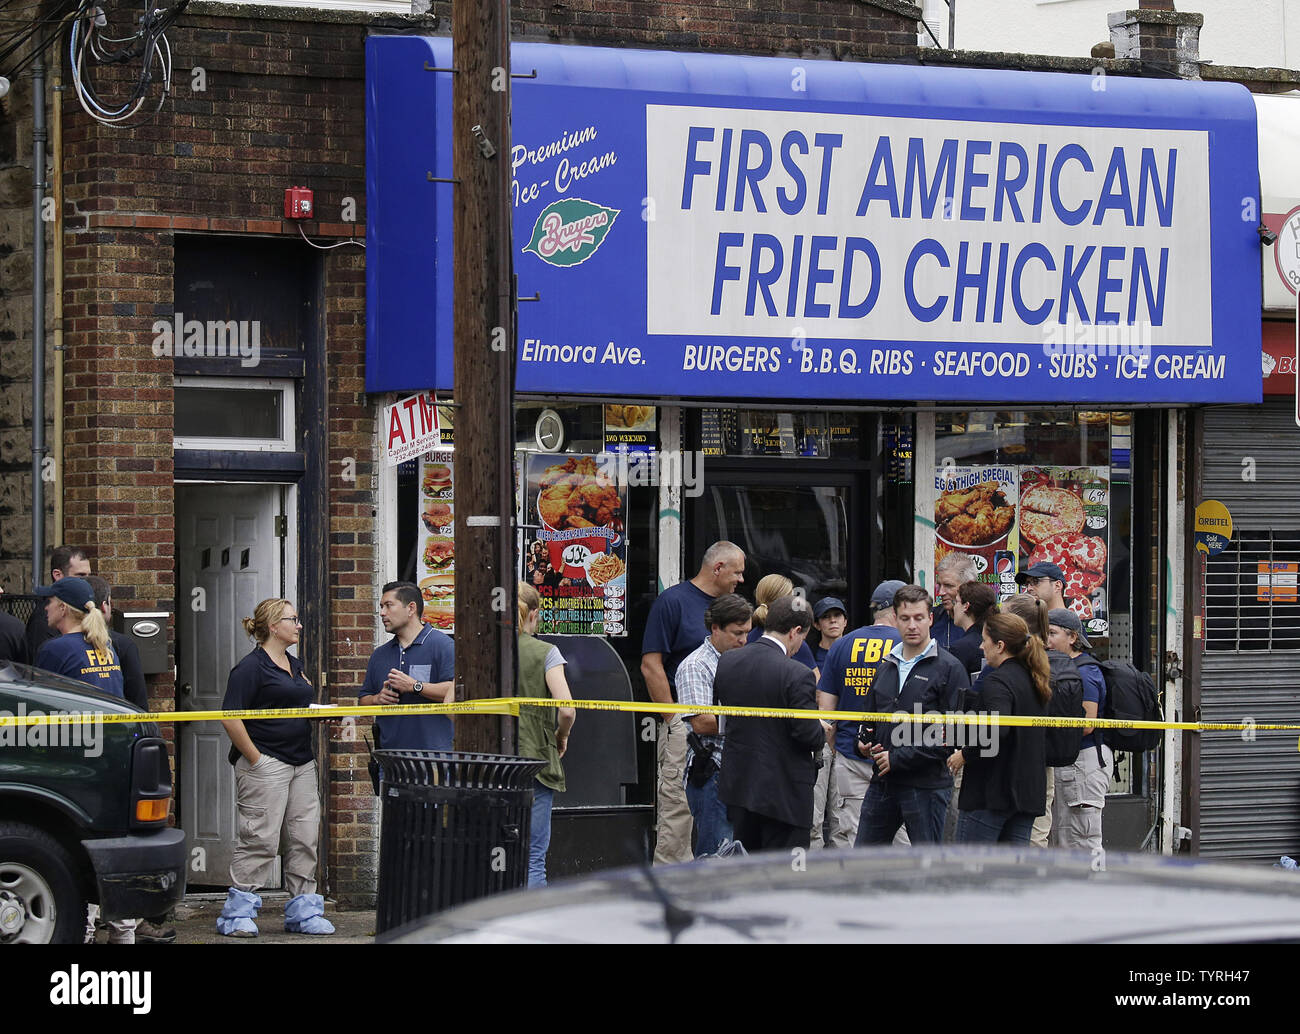 FBI investigators and police gather outside First American Fried Chicken after Ahmad Khan Rahami, the man responsible for the New York and New Jersey bombings, was apprehended by police on September 19, 2016 in Elizabeth, New Jersey. Two days before, an explosion from a bomb went off on West 23rd Street in Manhattan around 8:30 p.m. on Saturday, injuring 29 people on West 23rd Street in Manhattan. The man responsible for the explosion in Manhattan on Saturday night and an earlier bombing in New Jersey, Ahmad Khan Rahami, was taken into custody on Monday after he was wounded in a gunfight with Stock Photo